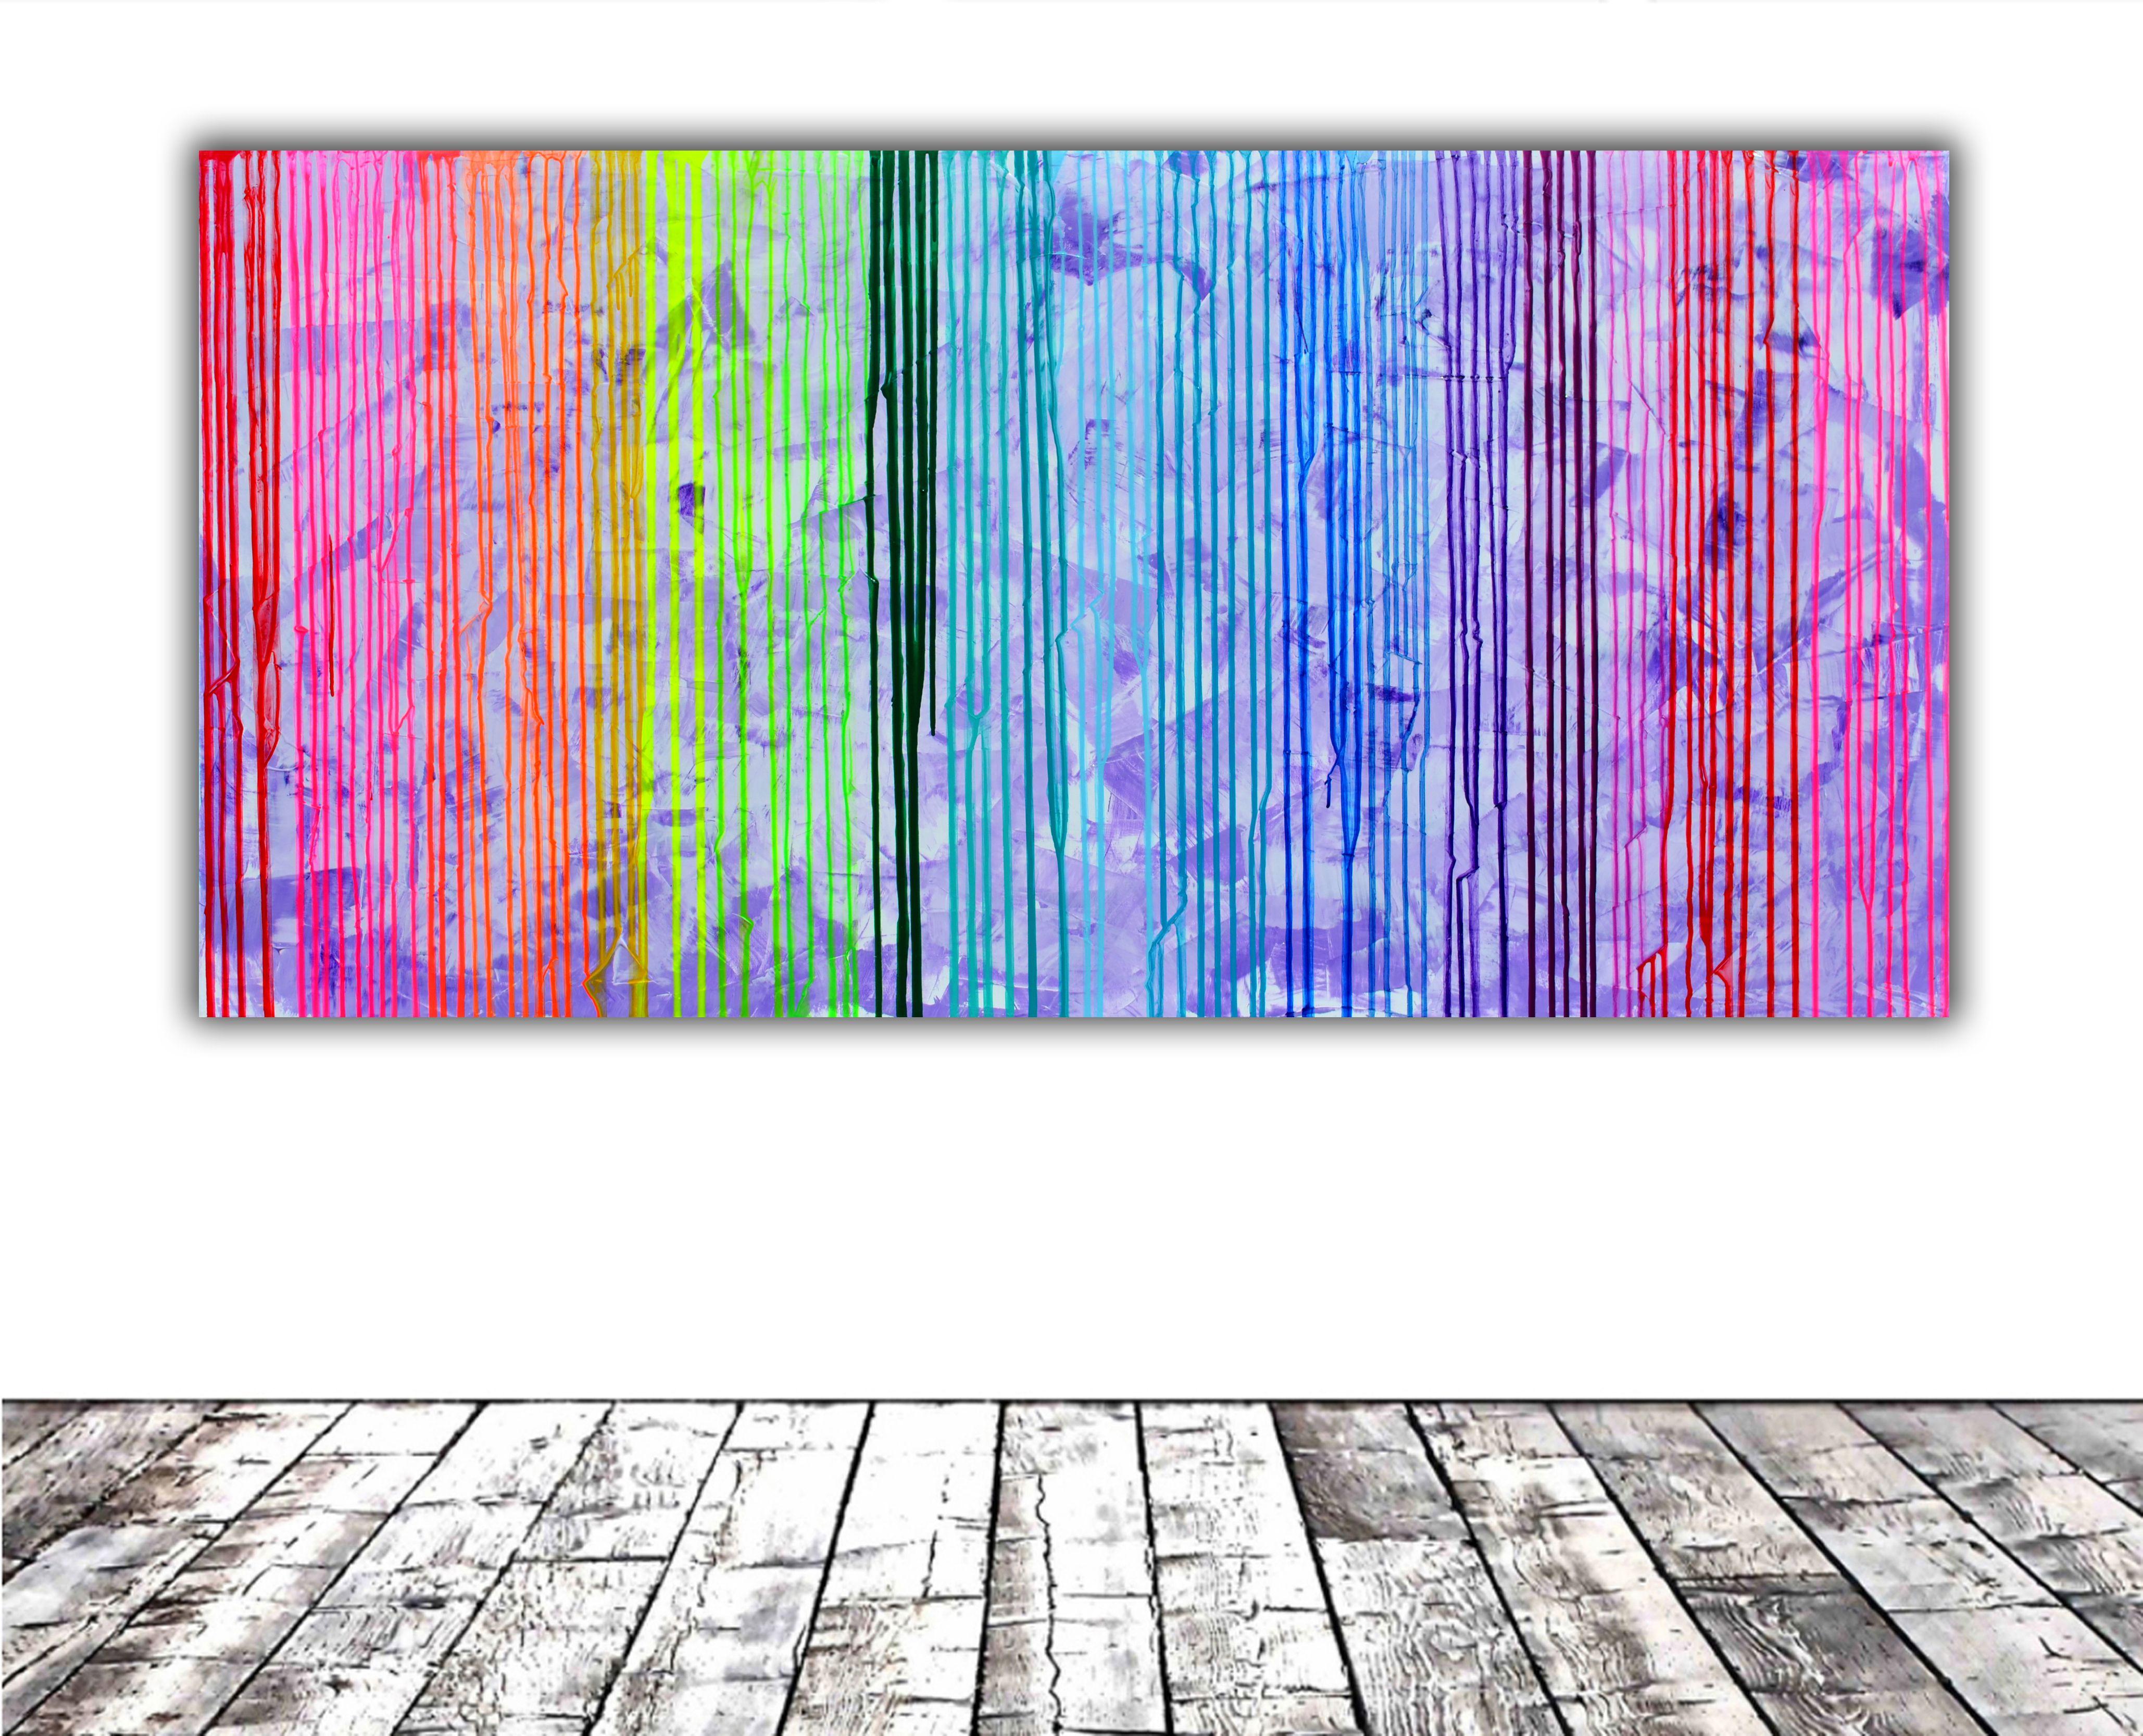 READY TO HANG - 3D GALLERY QUALITY  Dimensions: 160x80X4 cm (one PCS) 63x31.5x1.6 inches.  This work is a real therapy for the eyes and for the soul. This artwork fits perfectly in a large space, a big leaving room, a hotel reception or a conference